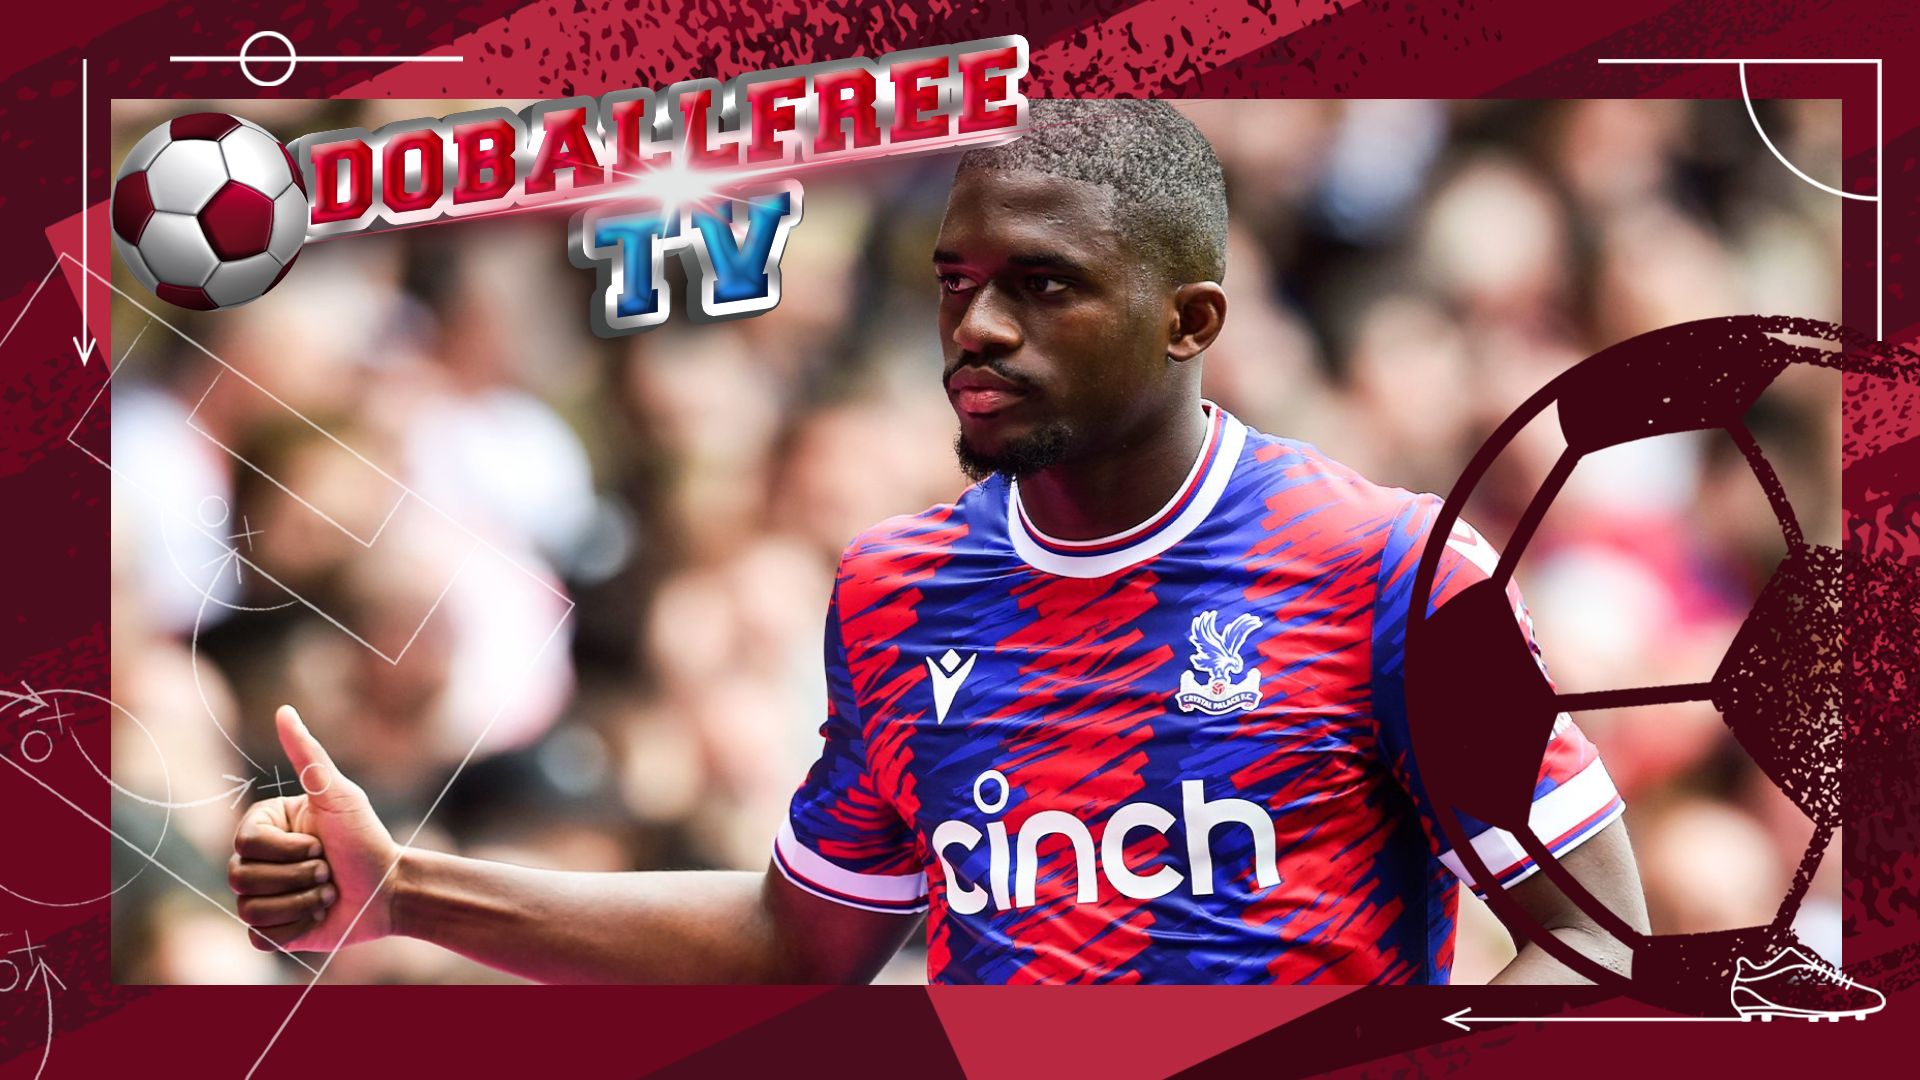 Cheikh Doucoure has signed a new contract with Crystal Palace. It is a long-term contract.